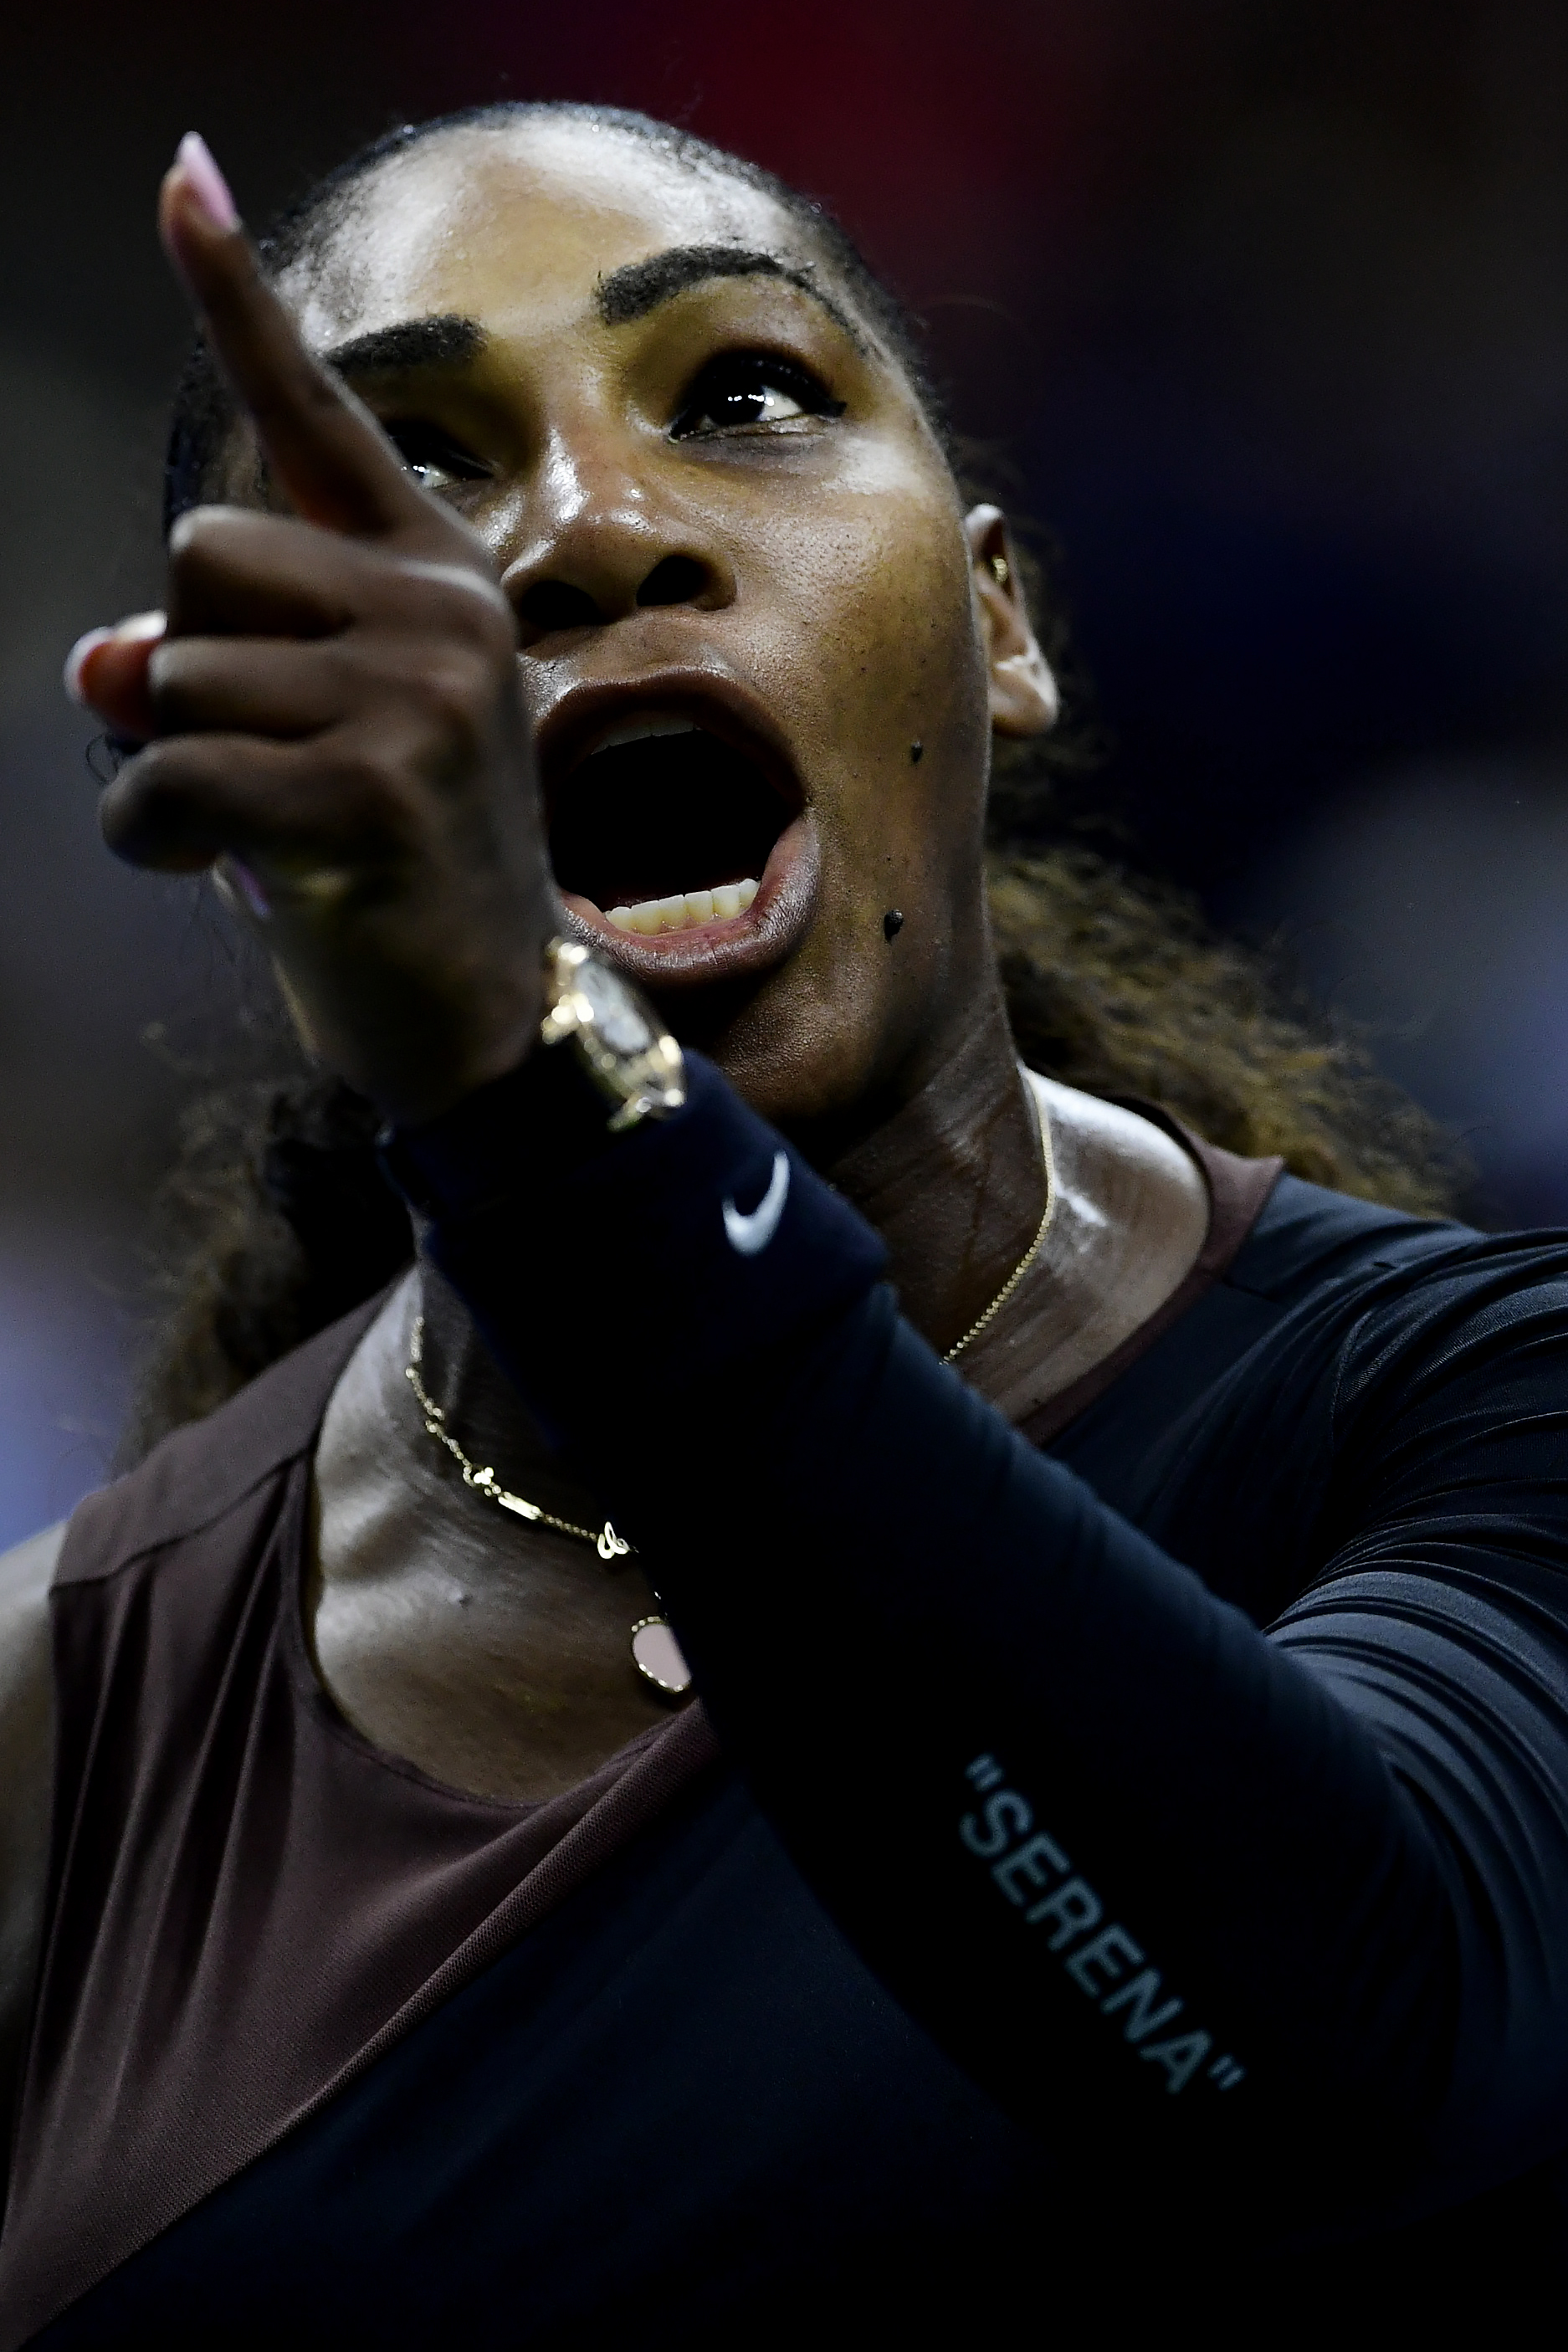  Serena Williams of the United States argues with umpire Carlos Ramos during her Women's Singles finals match against Naomi Osaka of Japan on Day Thirteen of the 2018 US Open at the USTA Billie Jean King National Tennis Center on September 8, 2018 in